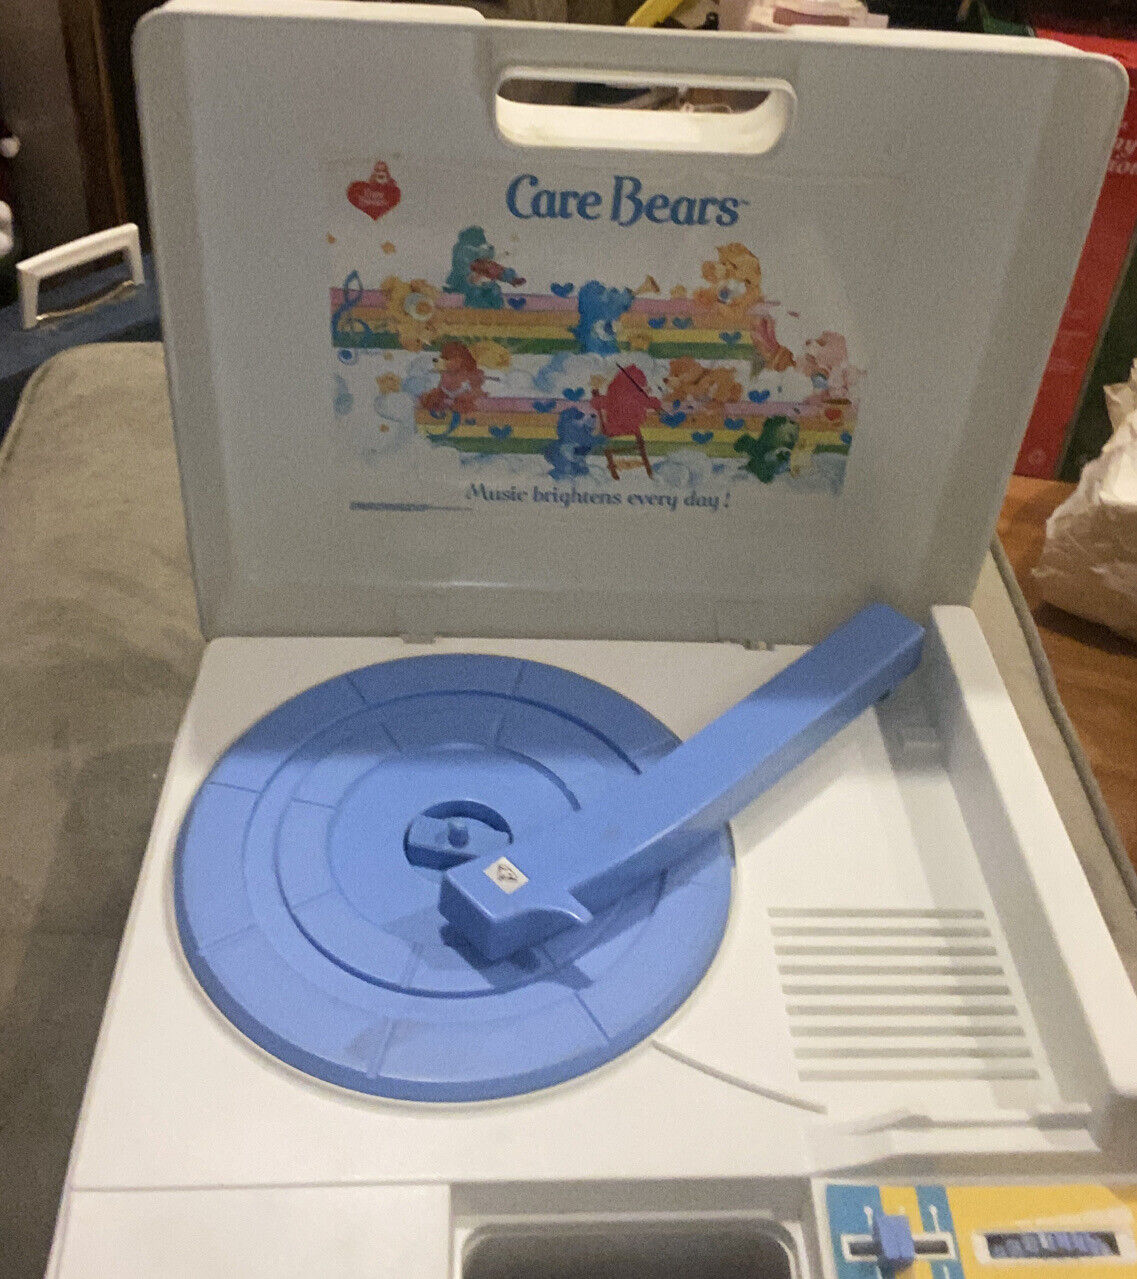 Vintage CARE BEARS Phonograph Record Player Music Brightens Every Day